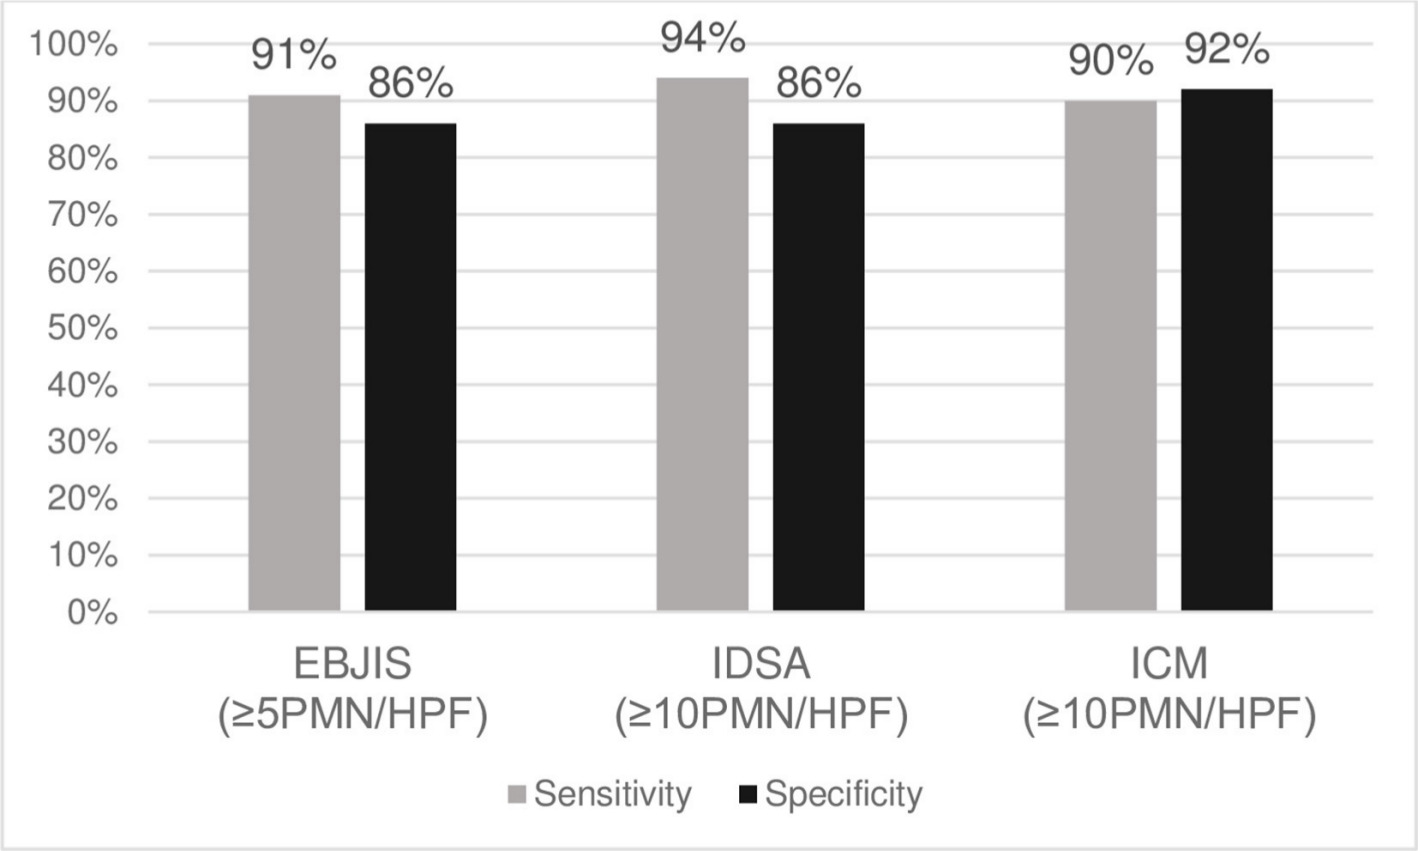 Fig. 3 
            Sensitivities and specificities of histopathology at the optimal cut-off level according to the European Bone and Joint Infection Society (EBJIS; ≥ 5 polymorphonuclear neutrophil (PMN)/high-powered field (HPF)), the Infectious Diseases Society of America (IDSA; ≥ 10 PMN/HPF), and the International Consensus Meeting (ICM; ≥ 10 PMN/HPF) criteria.
          